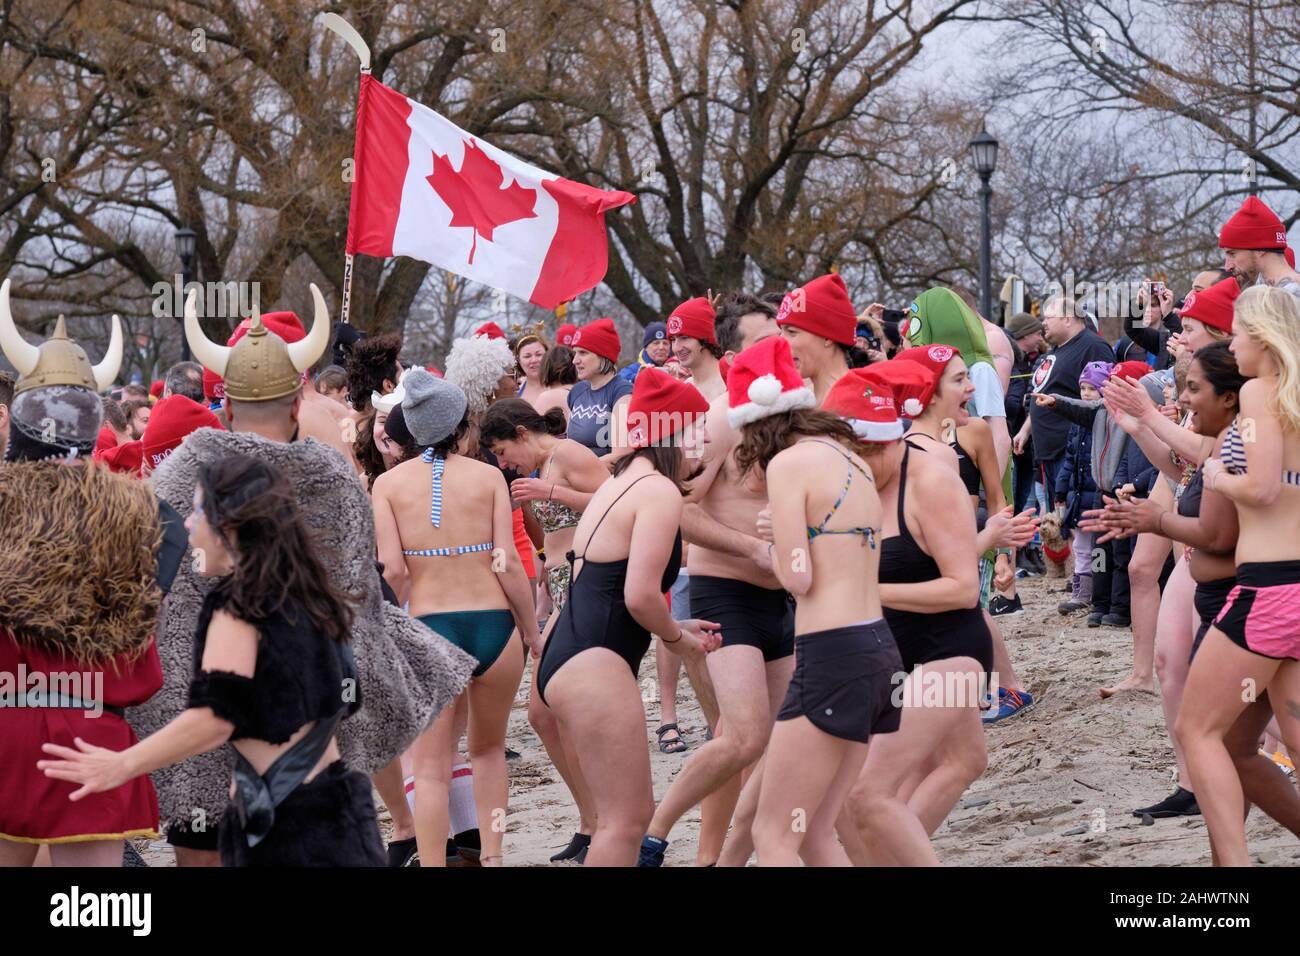 Toronto, Ontario, Canada. January 1st, 2020.  Over 300 registered participants gather to “do the dip” at Sunnyside Beach in Lake Ontario with temperature hovering around the freezing point. Stock Photo